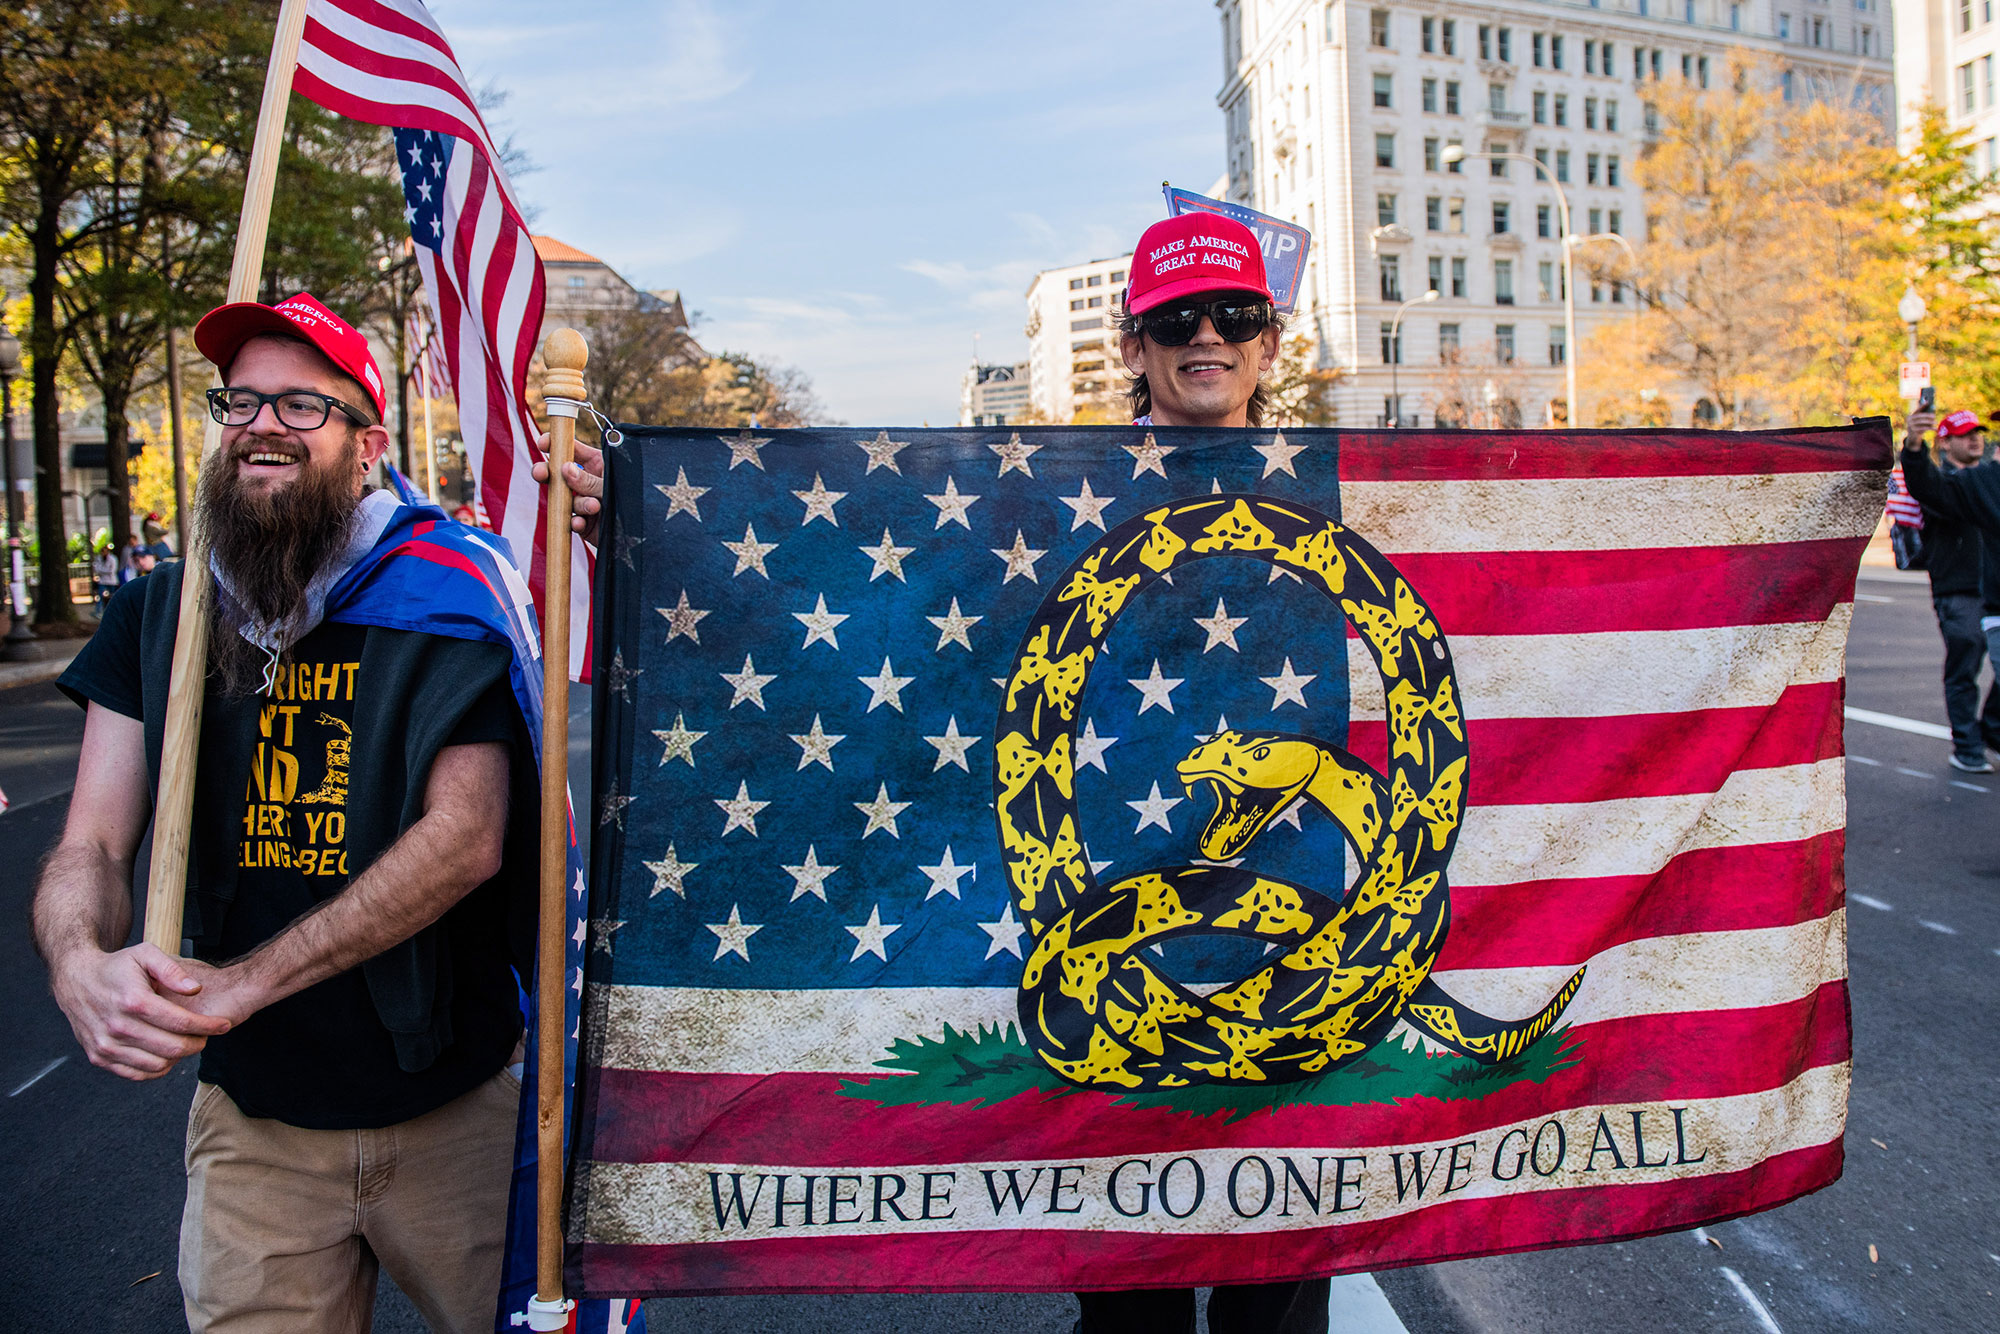 A Qanon supporter marches in route to the Supreme Court during the Million Maga March protest regarding election results on November 14, 2020 in Washington D.C